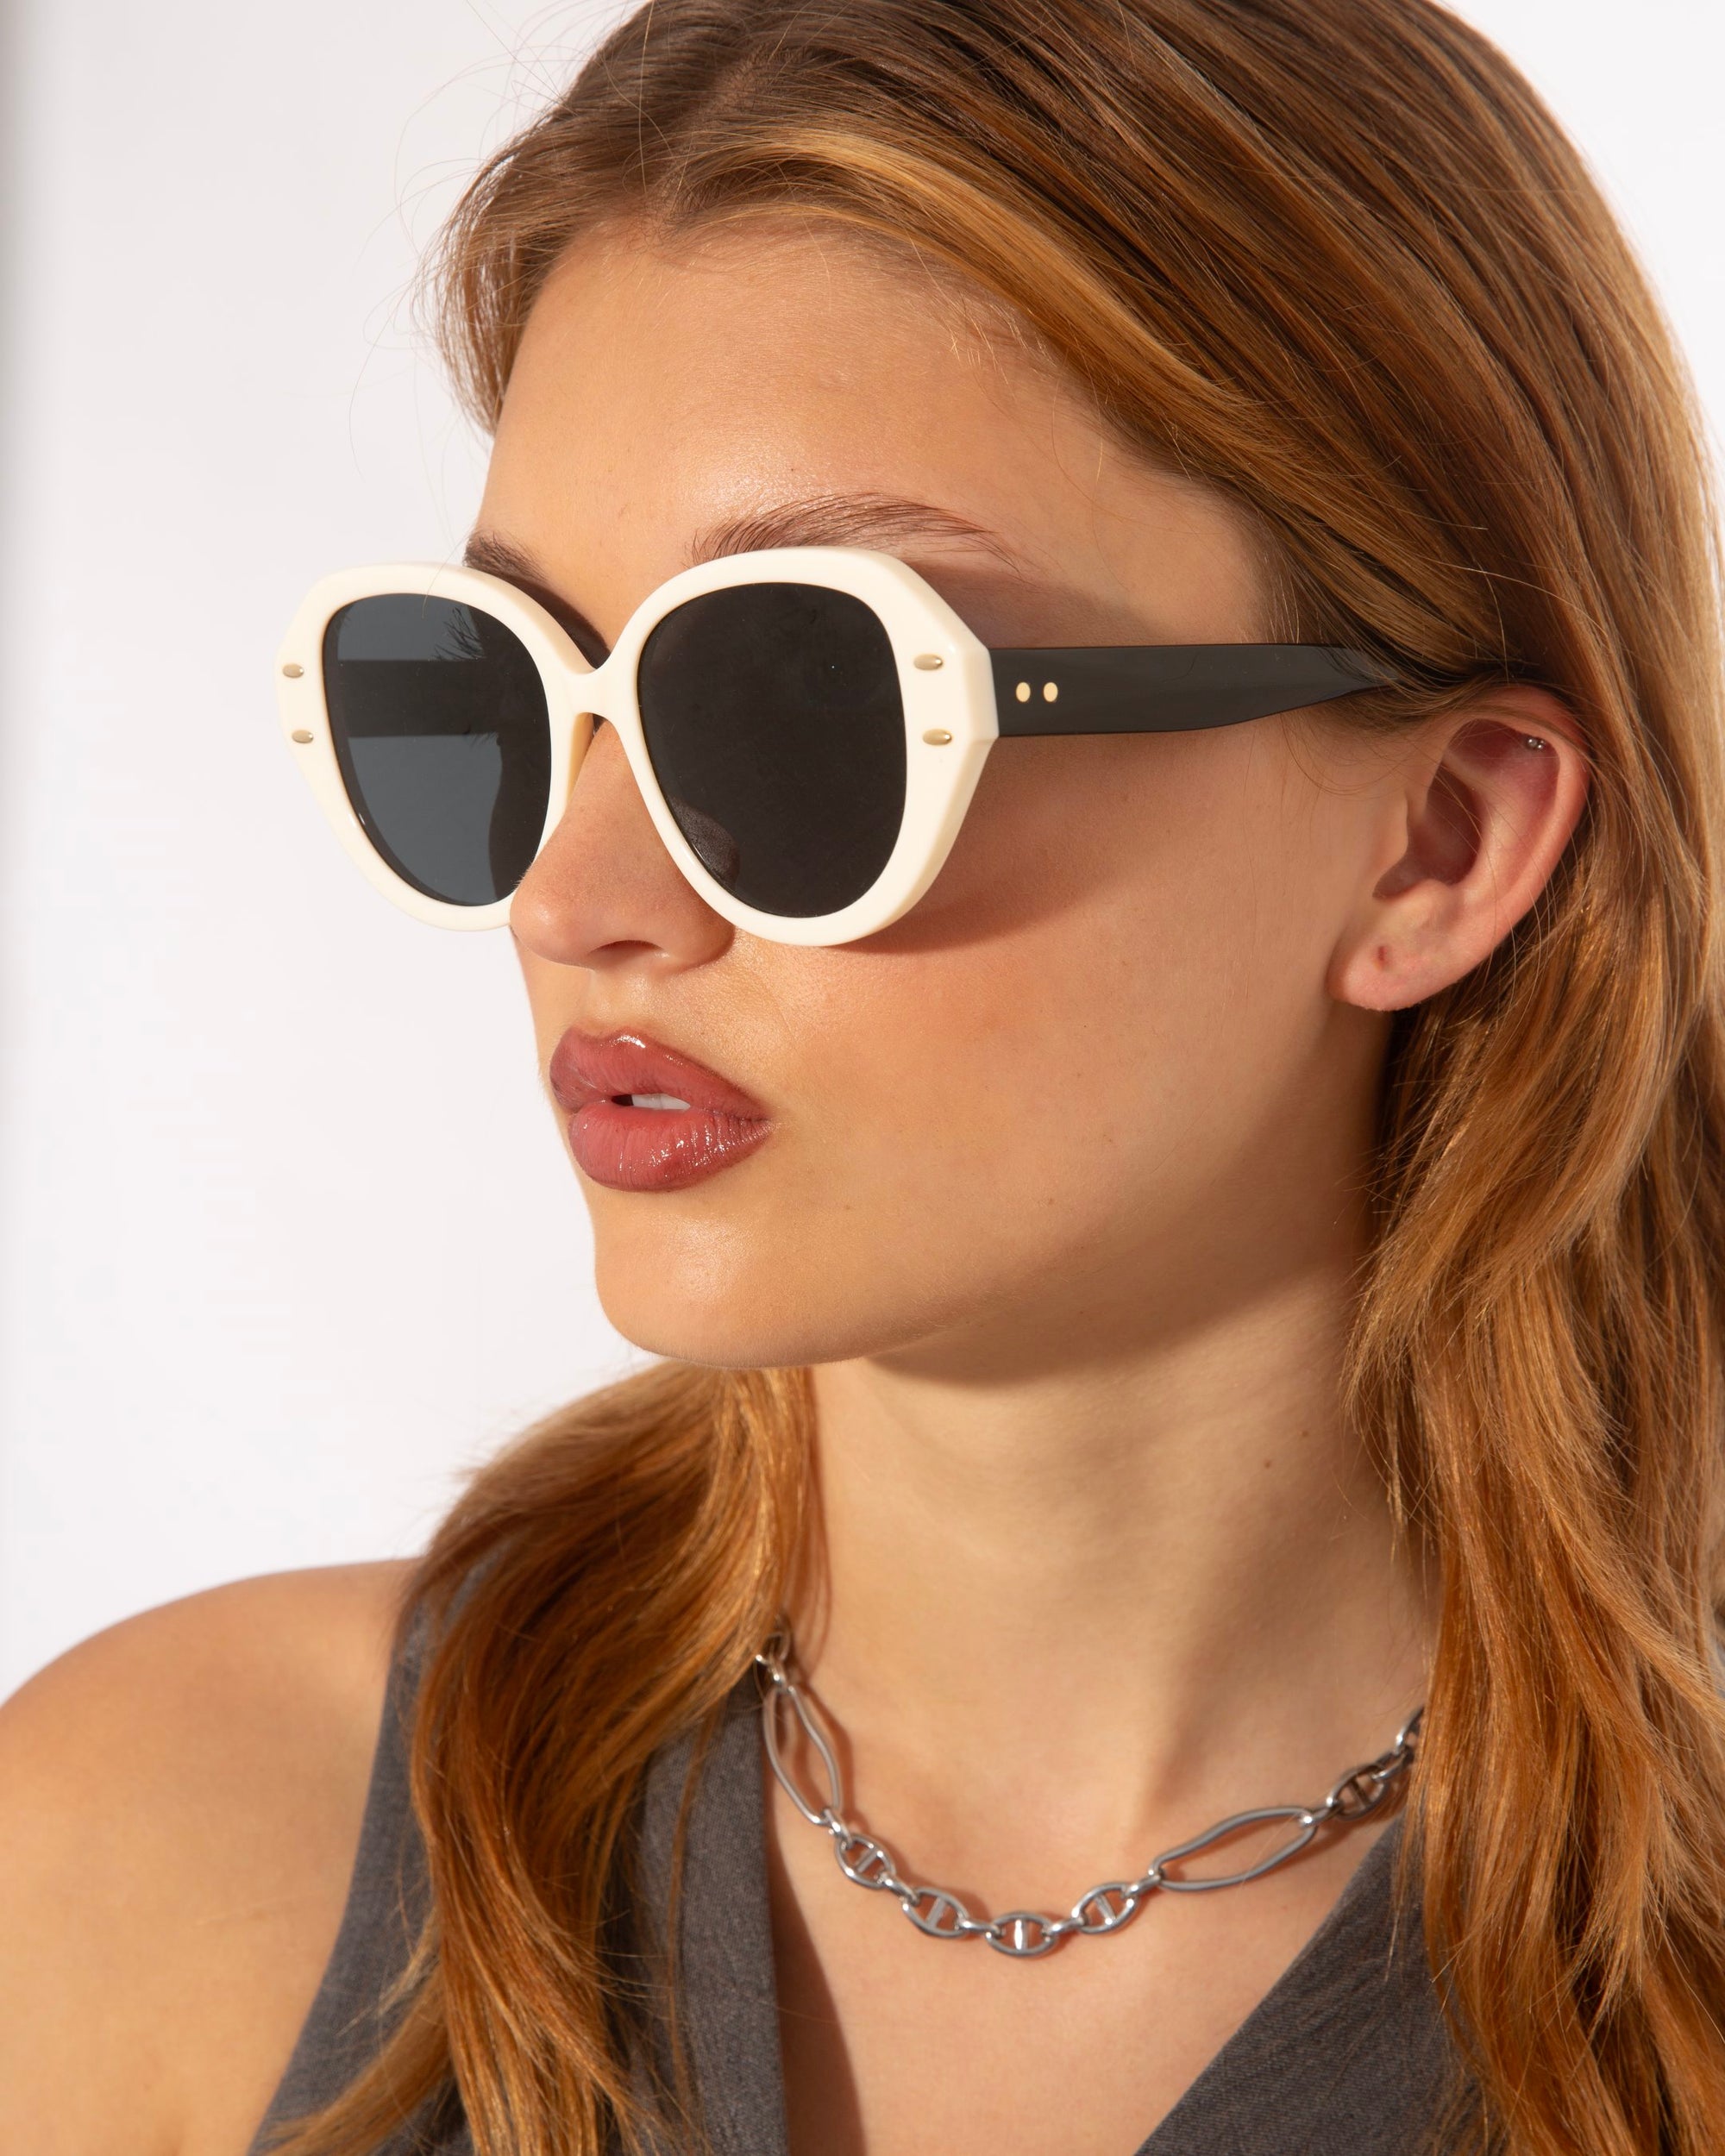 A person with long auburn hair and glossy lipstick is wearing large, round Mirage sunglasses from For Art&#39;s Sake® made of glossy acetate. They have a neutral expression and are shown against a plain background, wearing a gray top and a chunky chain necklace in gold and silver-tone metal.